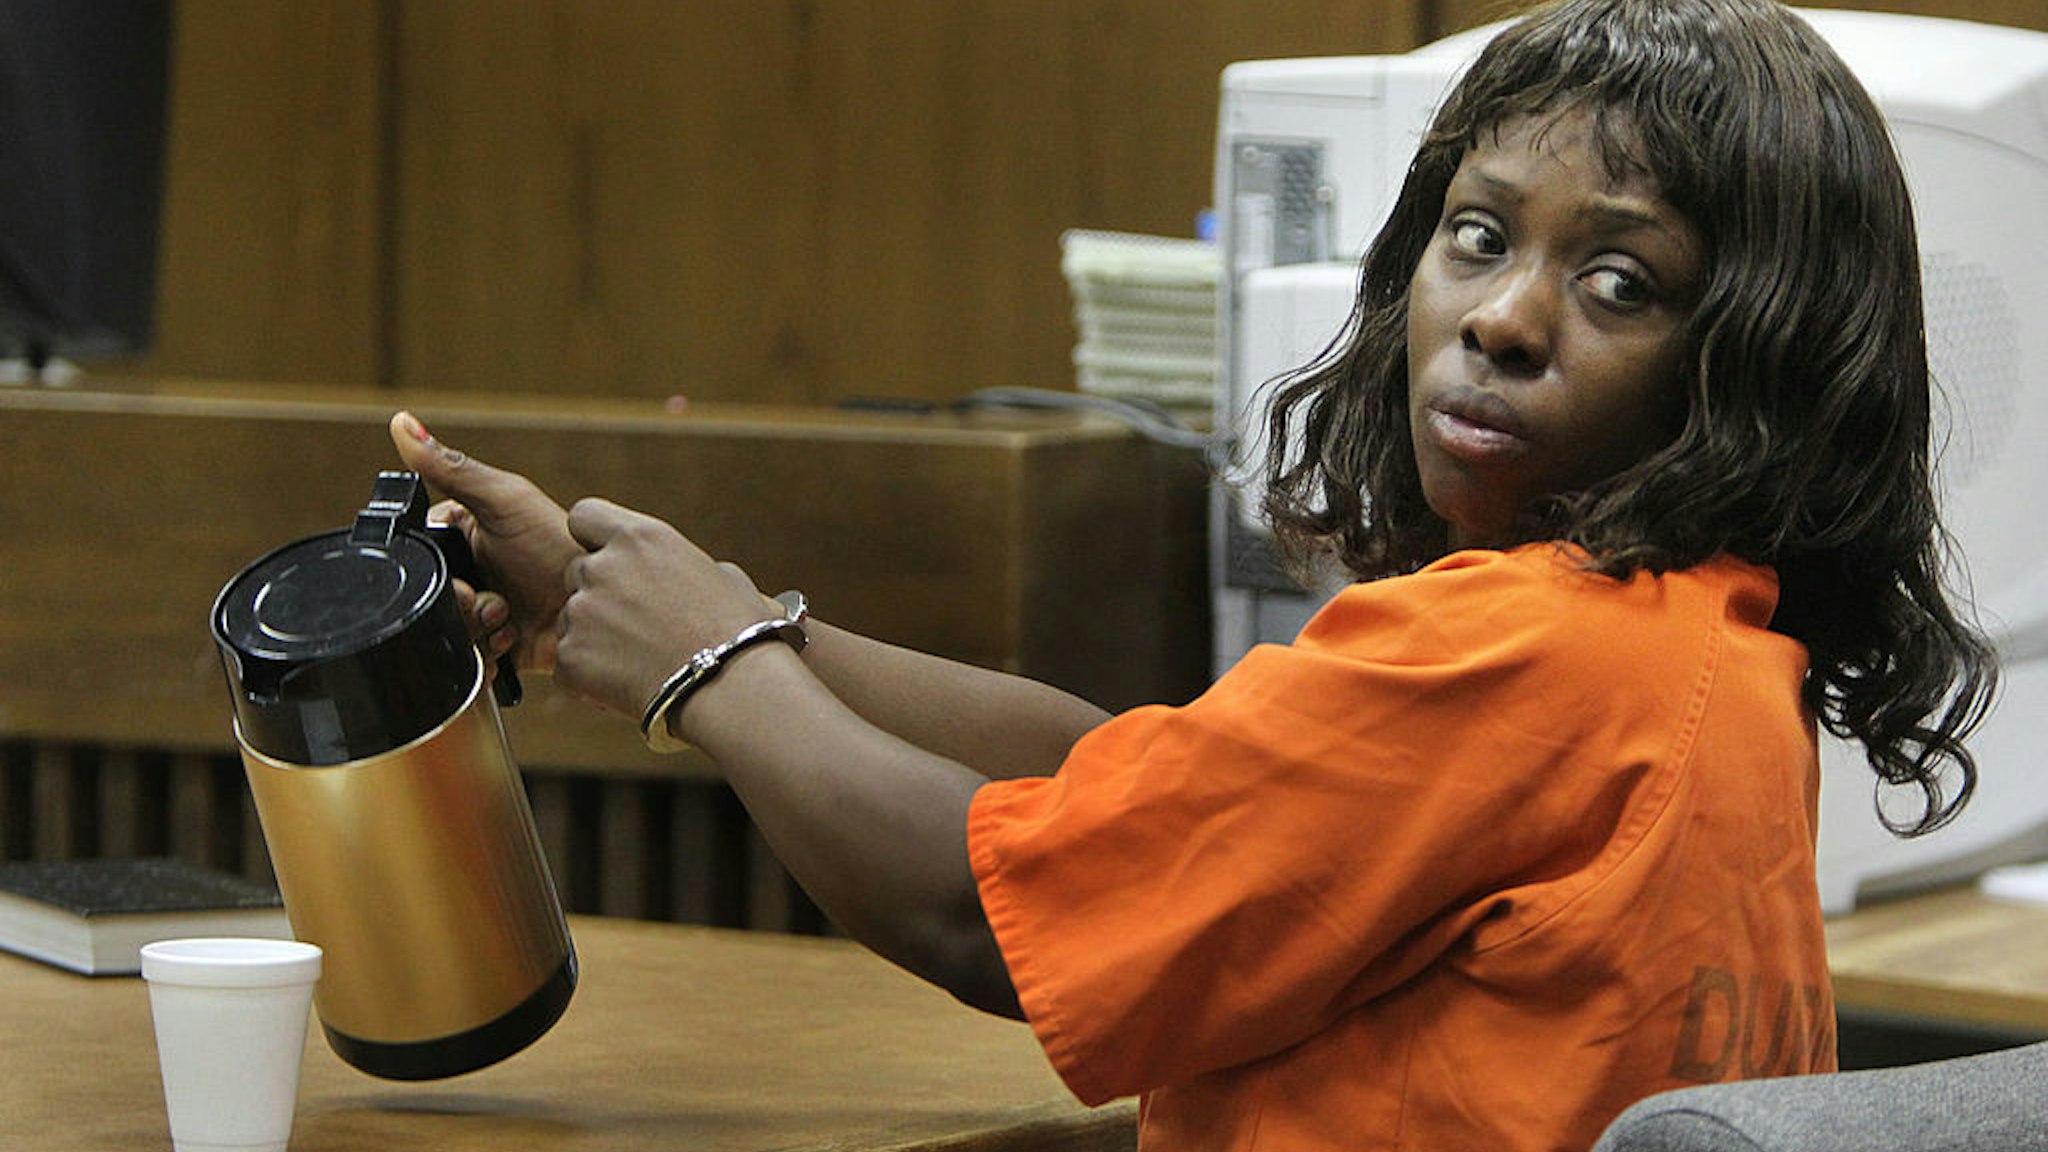 Pictured in this file photo from August 2010, Crystal Mangum, who was at the center of the Duke University lacrosse scandal, was charged with stabbing a man early Sunday, April 3, 2011, at a Durham, North Carolina apartment.